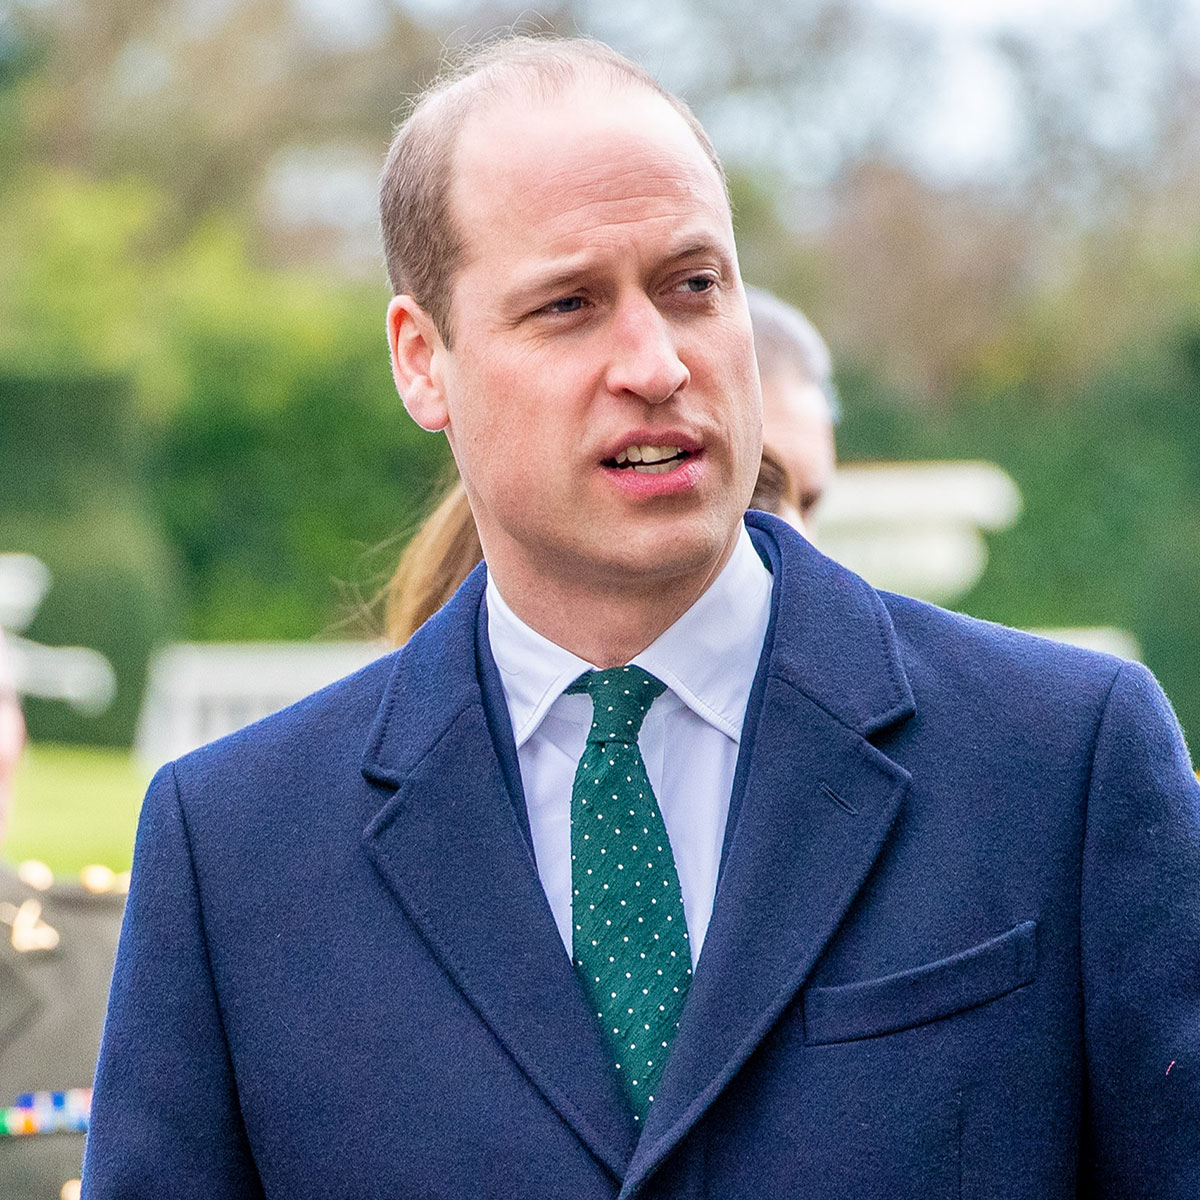 Prince William Attends A Former Girlfriends Wedding As Alleged Affair Is Trending Again